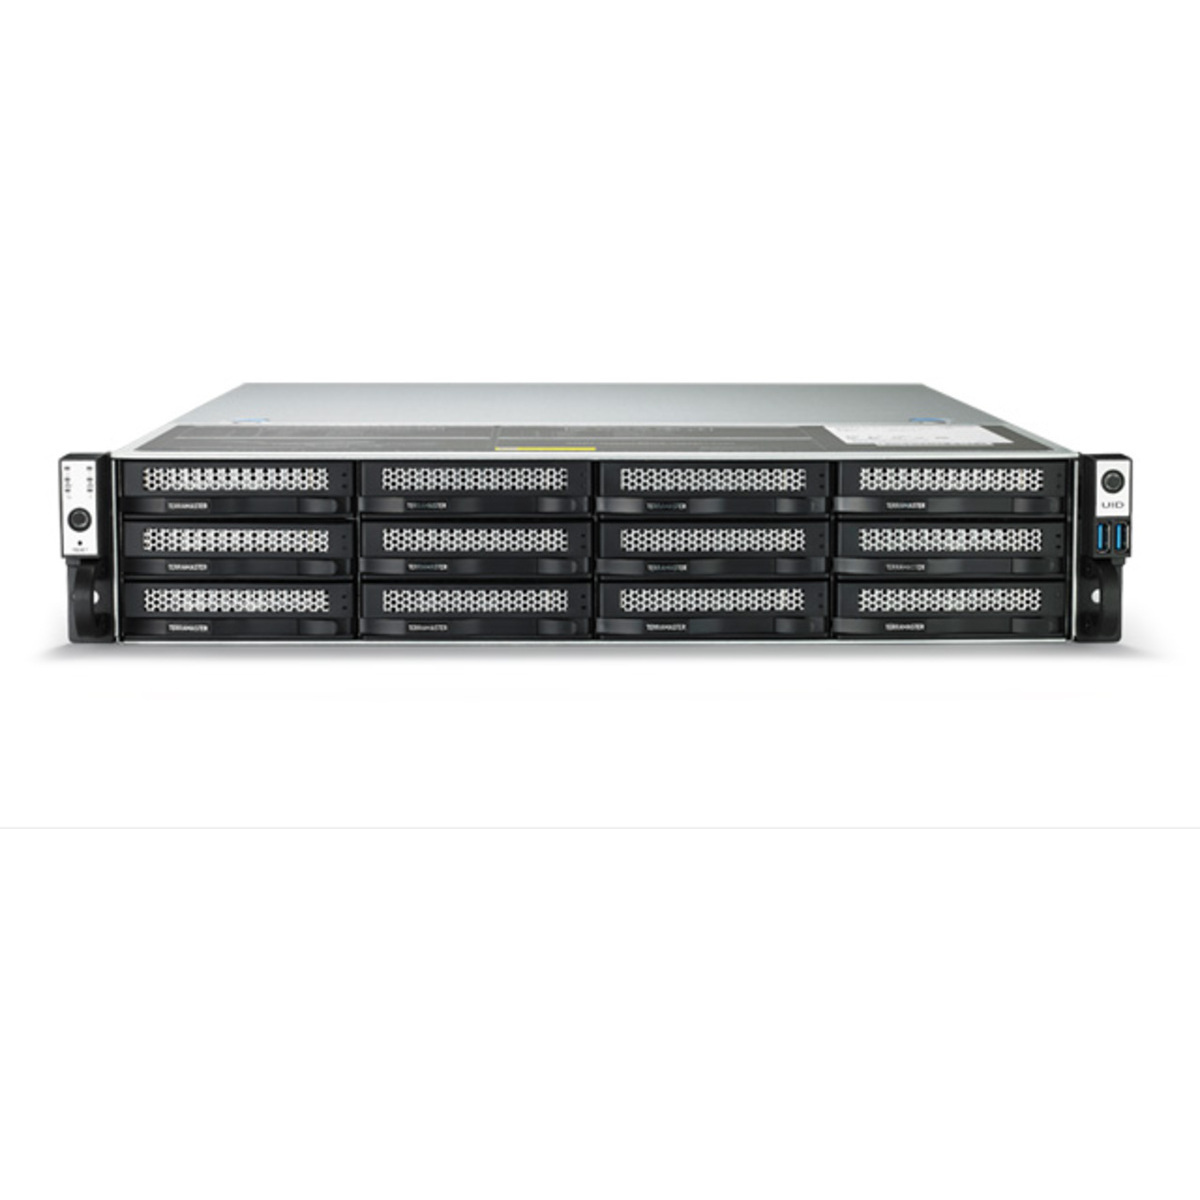 TerraMaster U12-722-2224 16tb 12-Bay RackMount Large Business / Enterprise NAS - Network Attached Storage Device 8x2tb Western Digital Red SA500 WDS200T1R0A 2.5 560/530MB/s SATA 6Gb/s SSD NAS Class Drives Installed - Burn-In Tested U12-722-2224